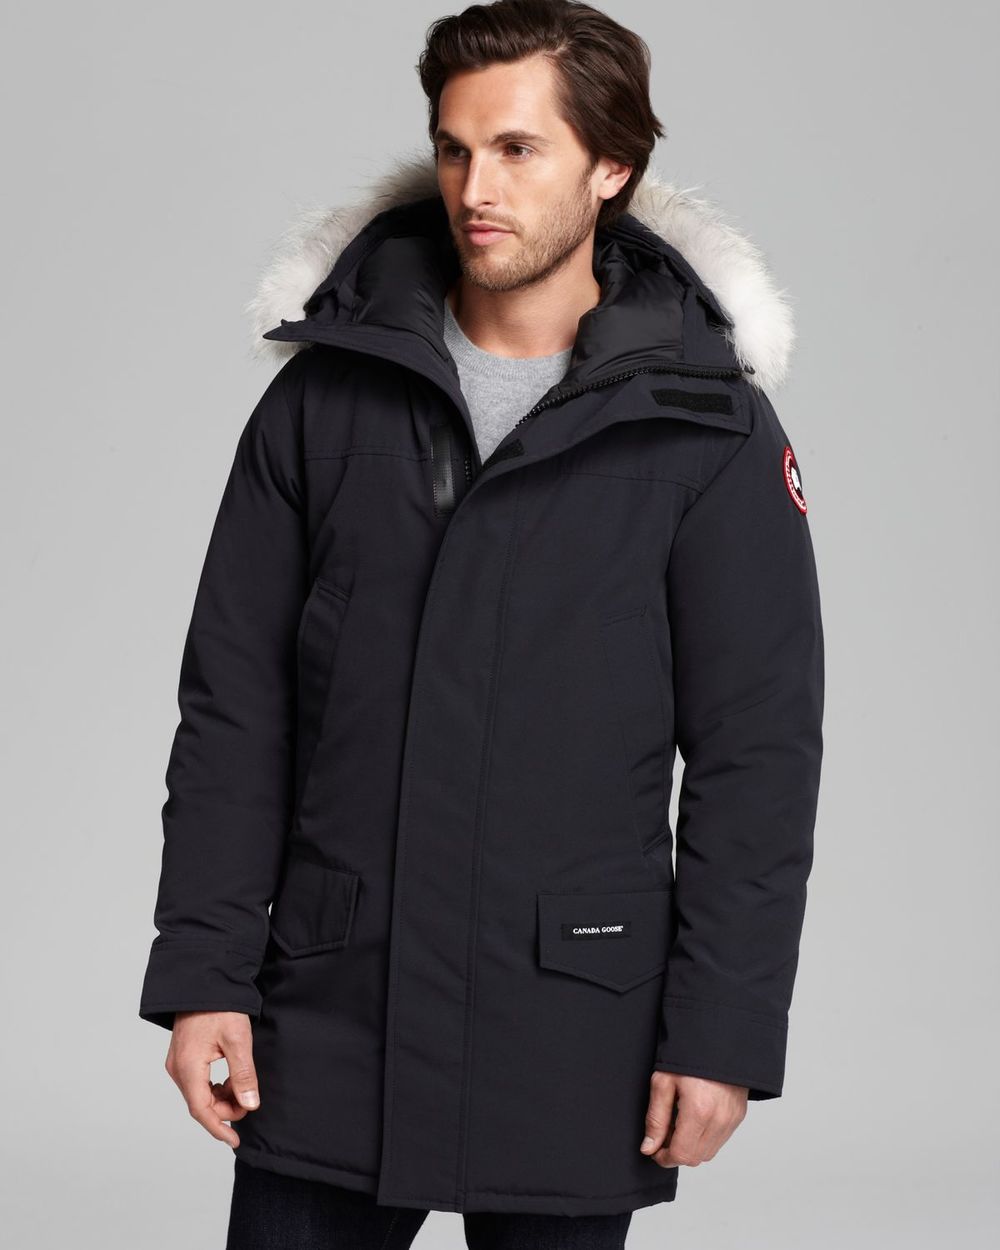 Canada Goose chilliwack parka replica authentic - 9 Canada Goose Alternatives To Fit Every Budget �� AS RAKESTRAW ...